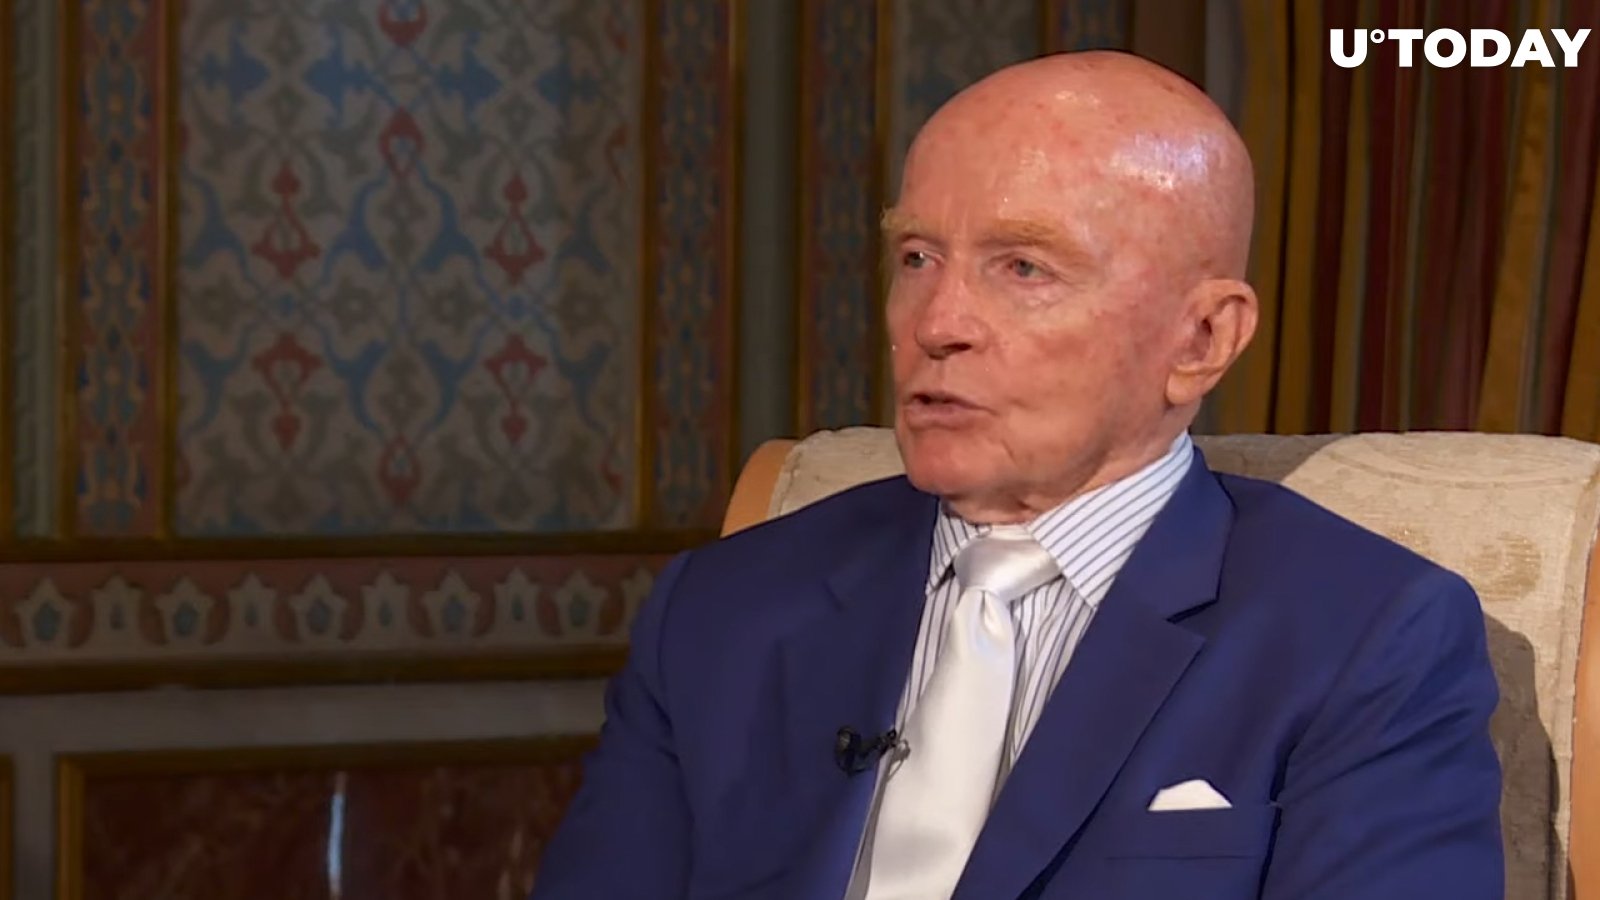 Legendary Investor Mark Mobius Sees Bitcoin Collapsing to $10K